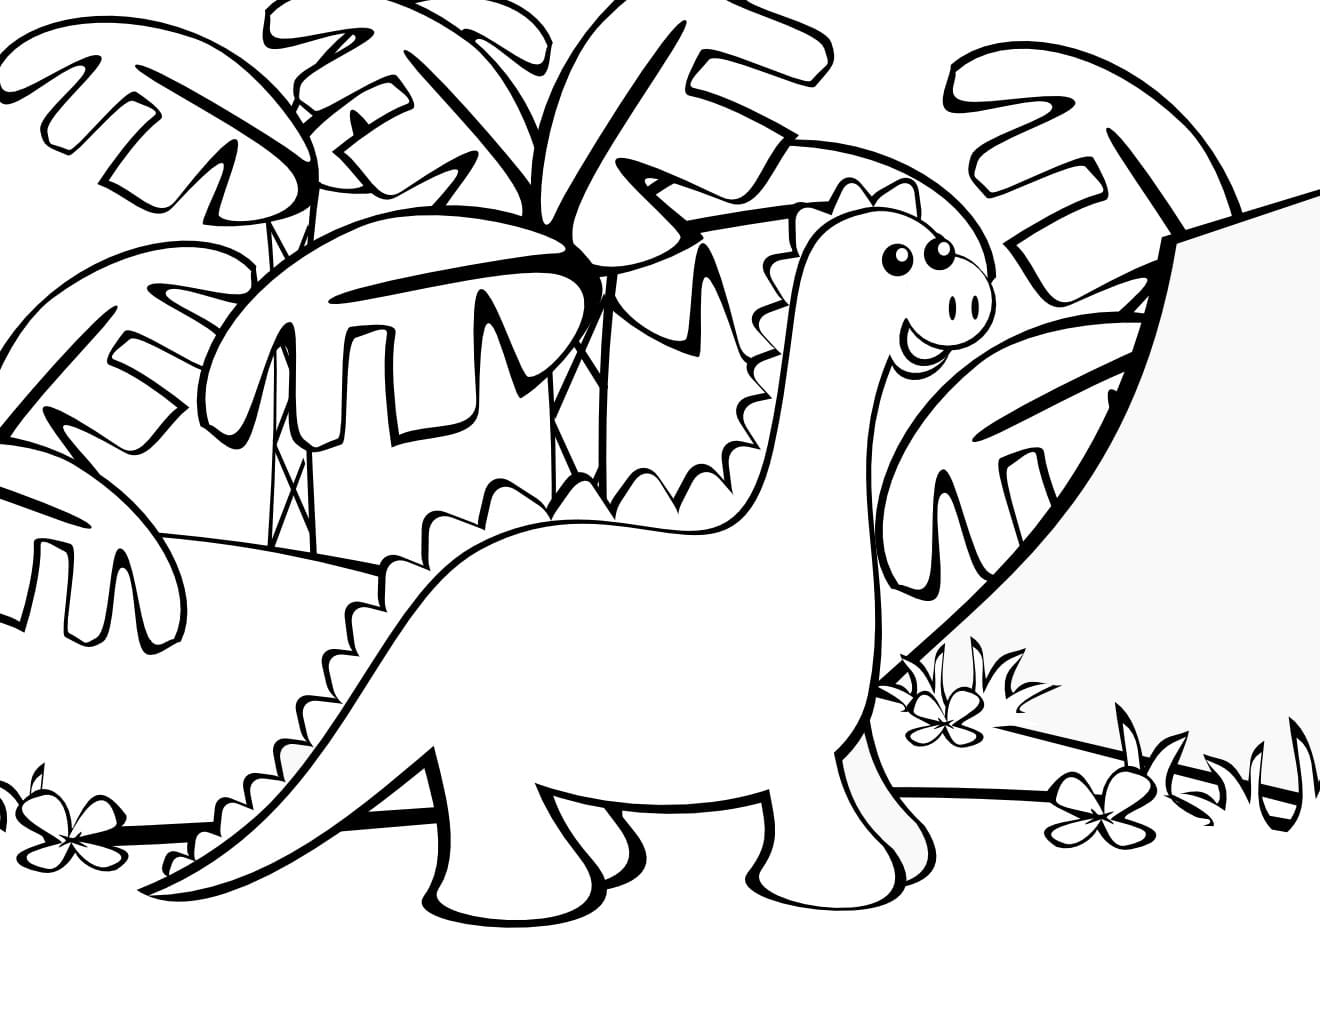 Download Coloring pages Dinosaurs. Large collection, Print for Free